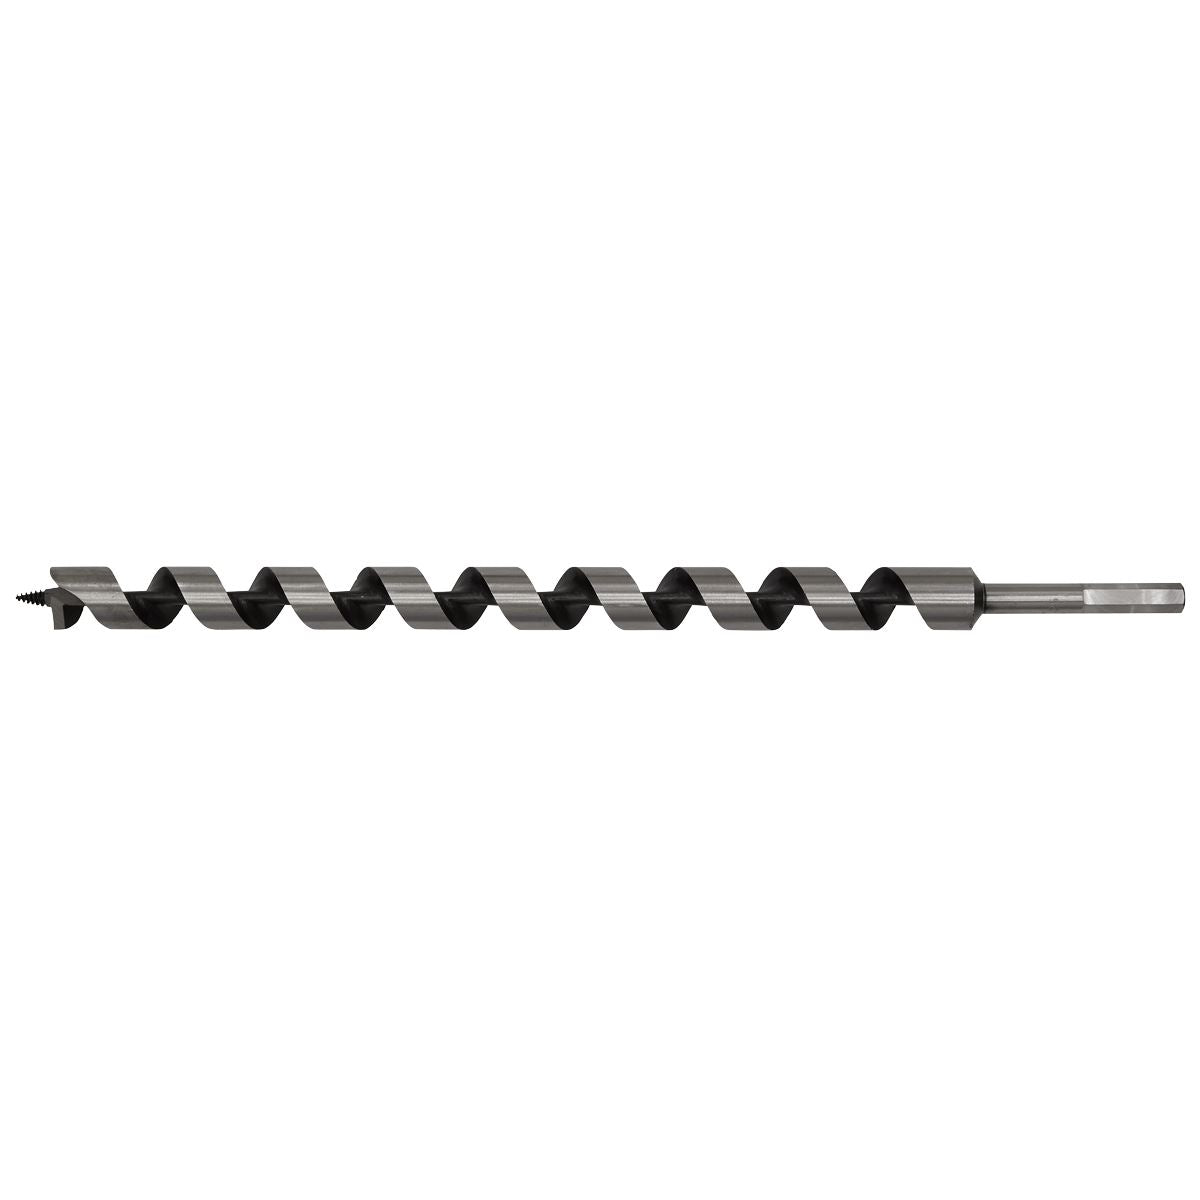 Worksafe by Sealey Auger Wood Drill Bit 25mm x 460mm